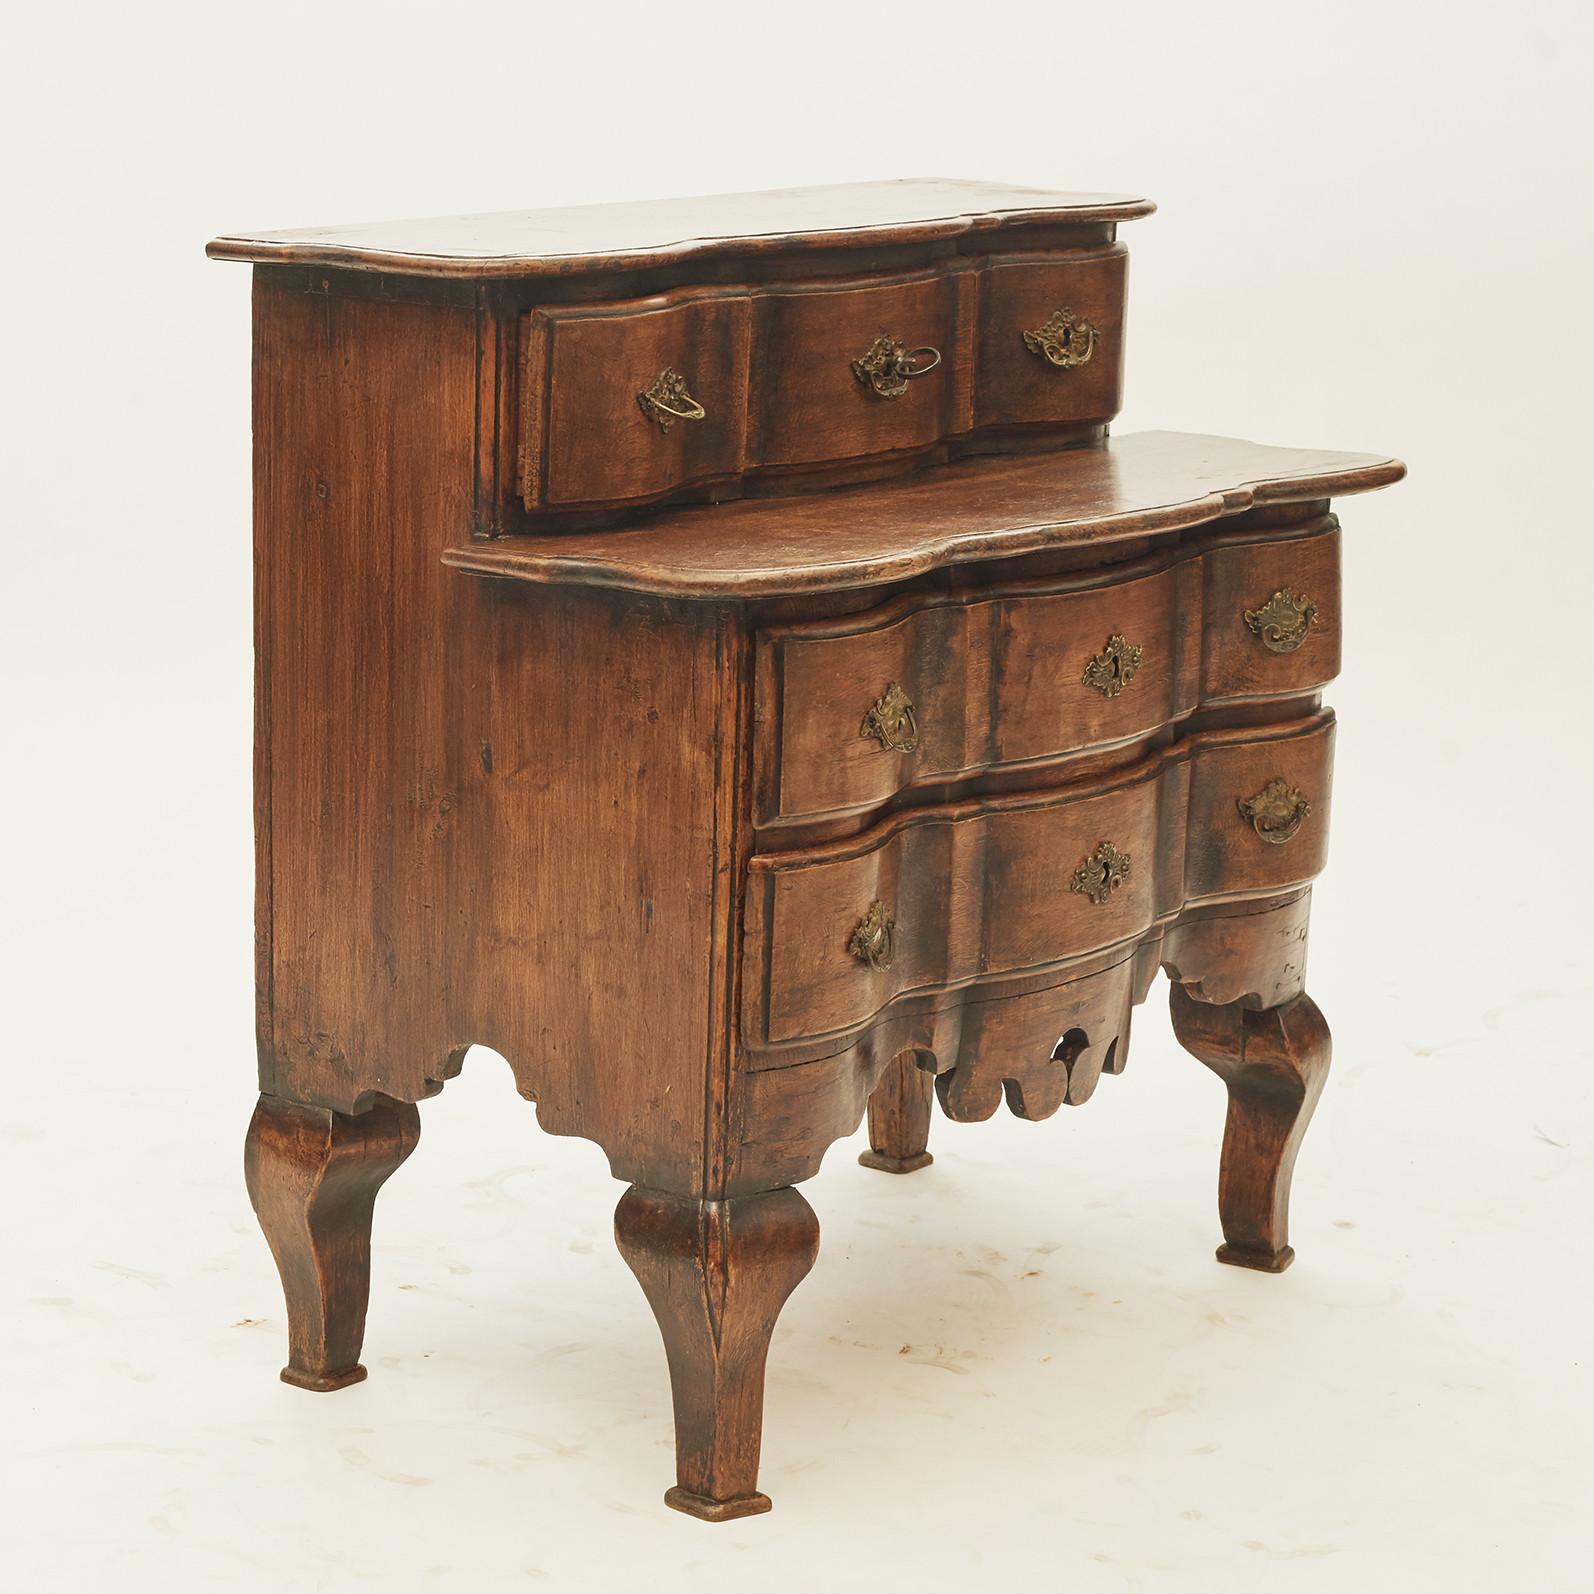 Swedish Country Baroque chest of drawers from Nordland. Curved front, 2 large drawers, 3 small drawers over the plate. Very charming chest of drawers with a rustic feel. Untouched with good patina.
Sweden 1750-1770.